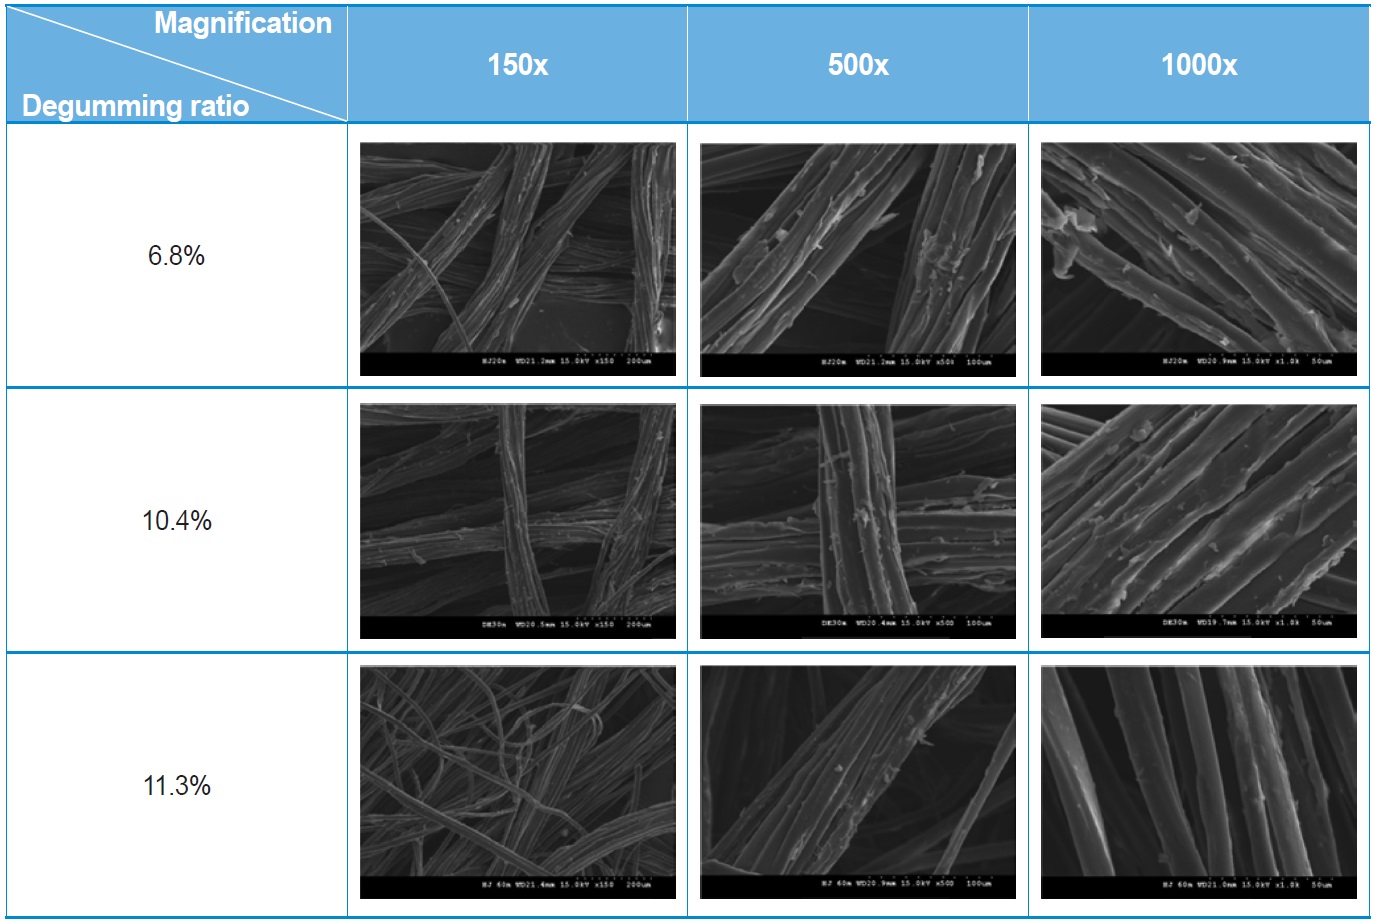 SEM images of degummed silk yarns with different degumming ratios and magnifications.